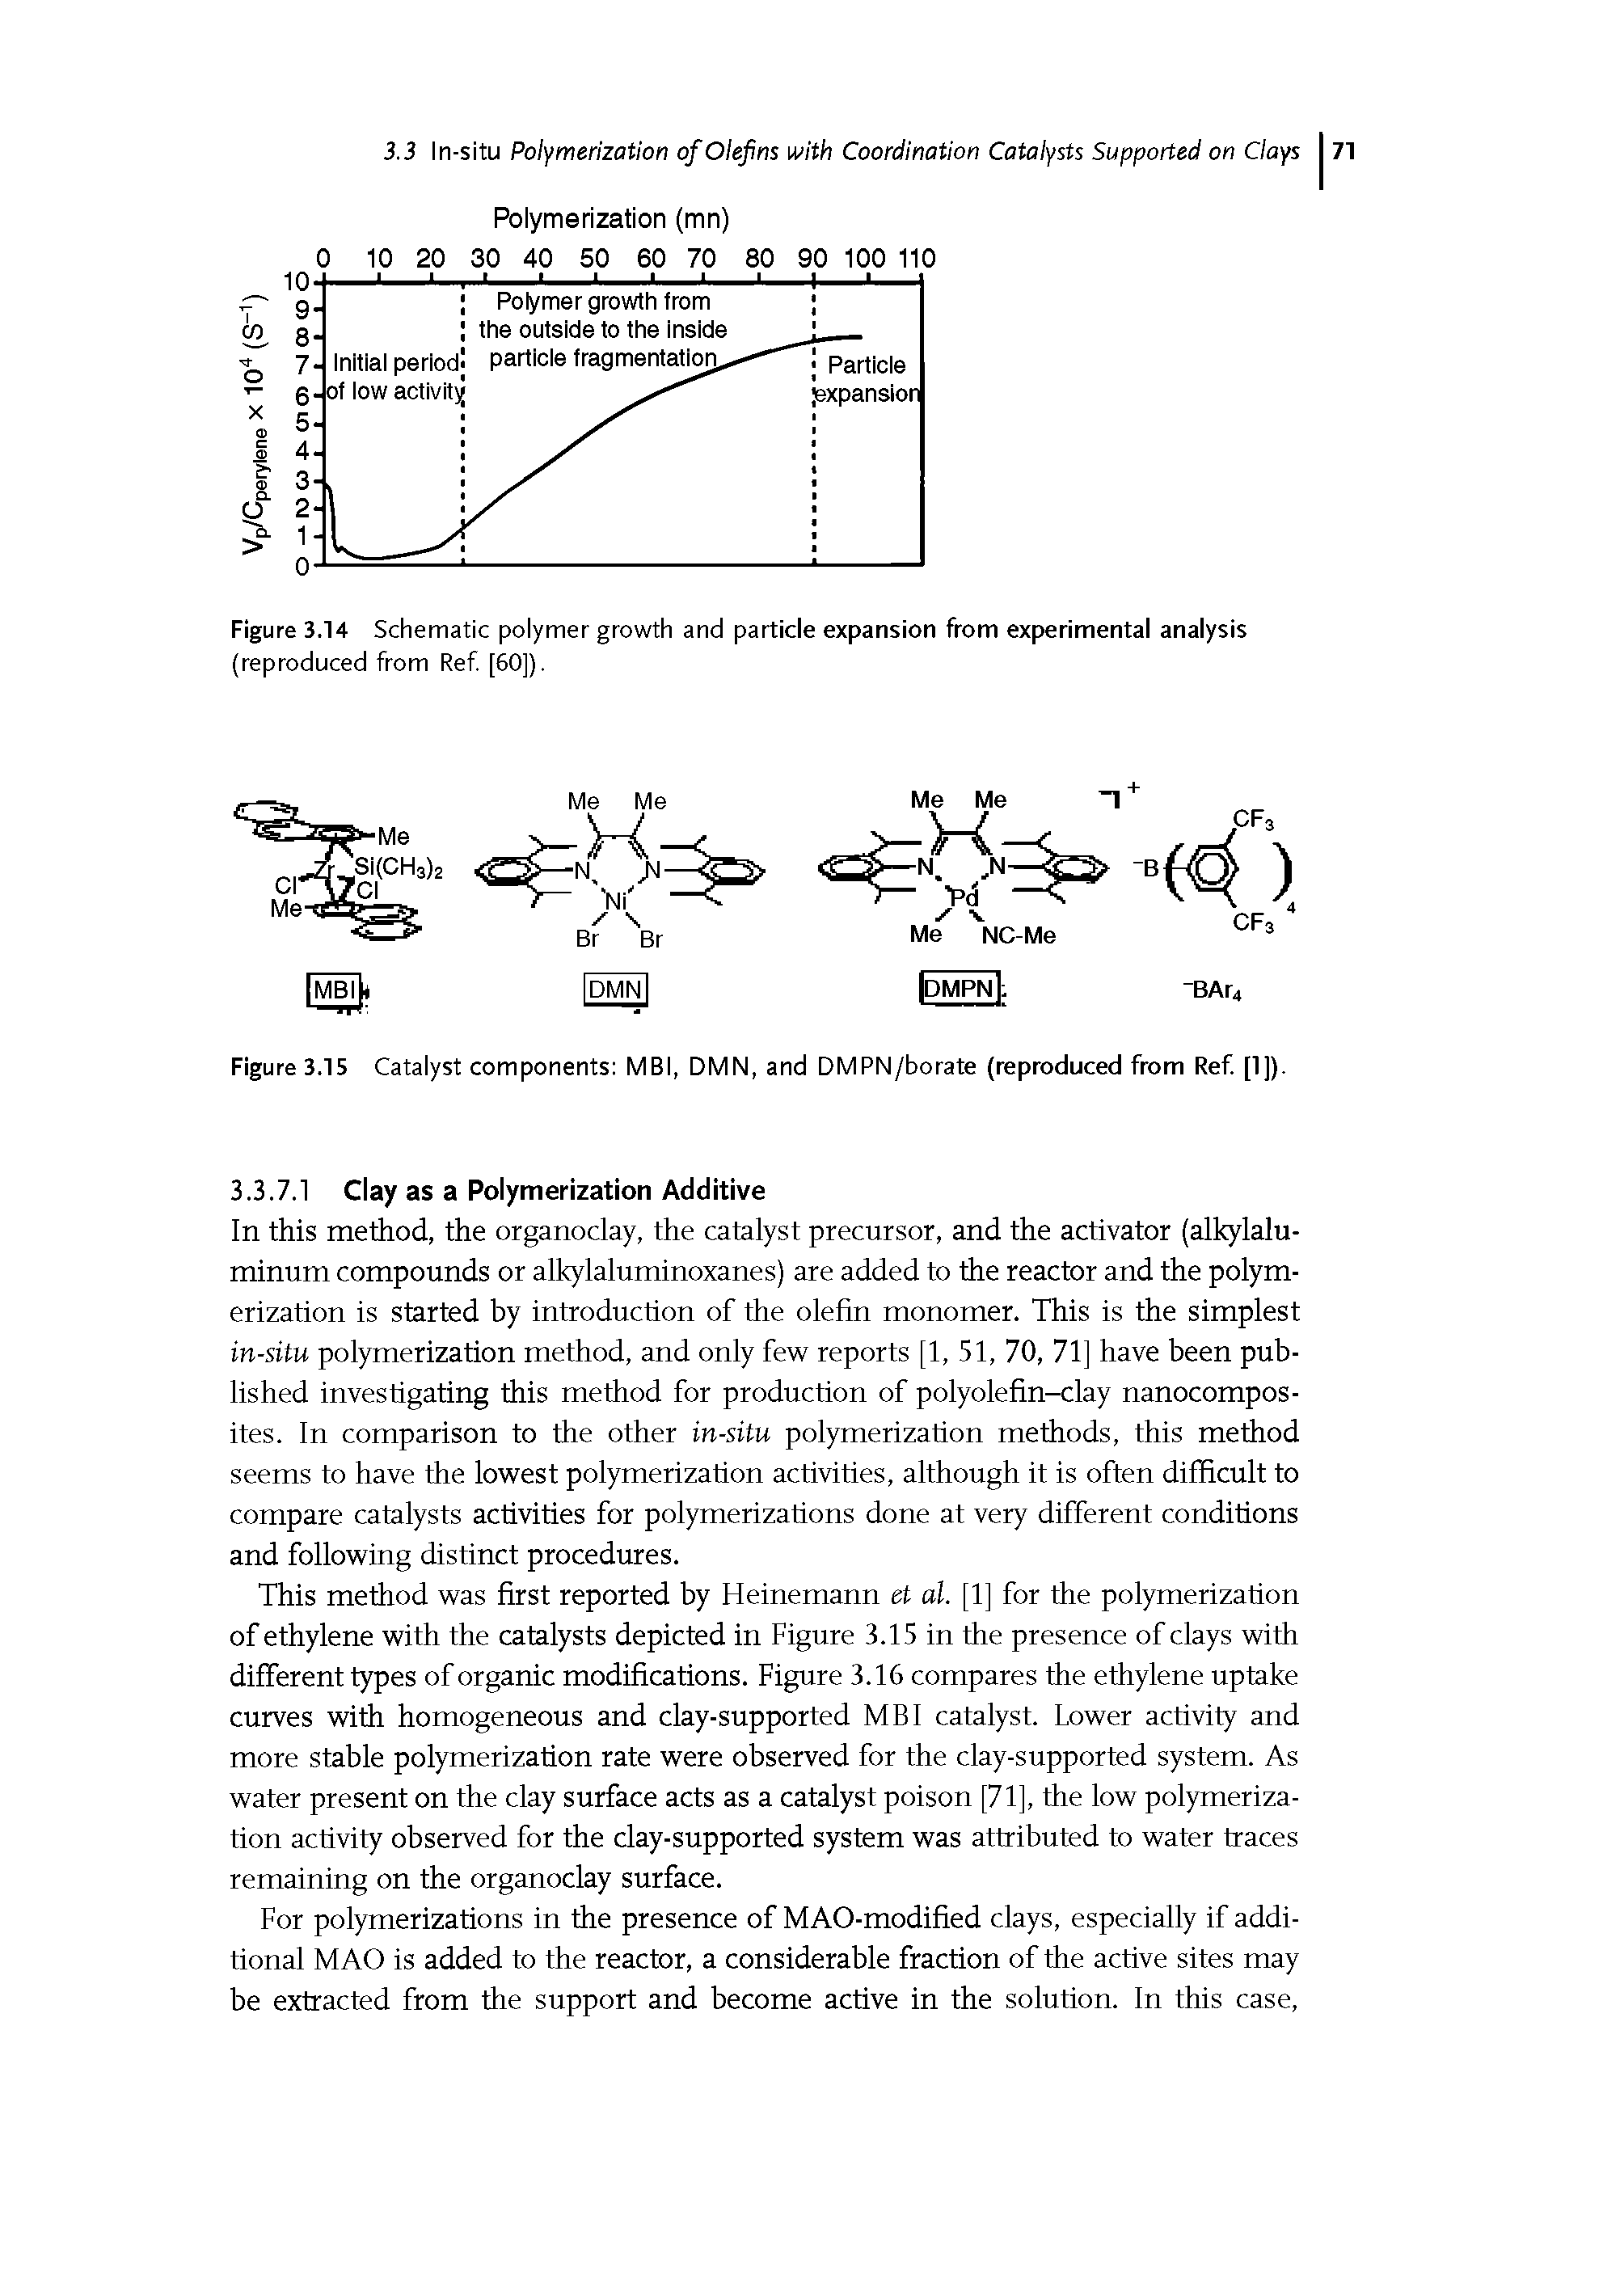 Figure 3.14 Schematic polymer growth and particle expansion from experimental analysis (reproduced from Ref. [60]).